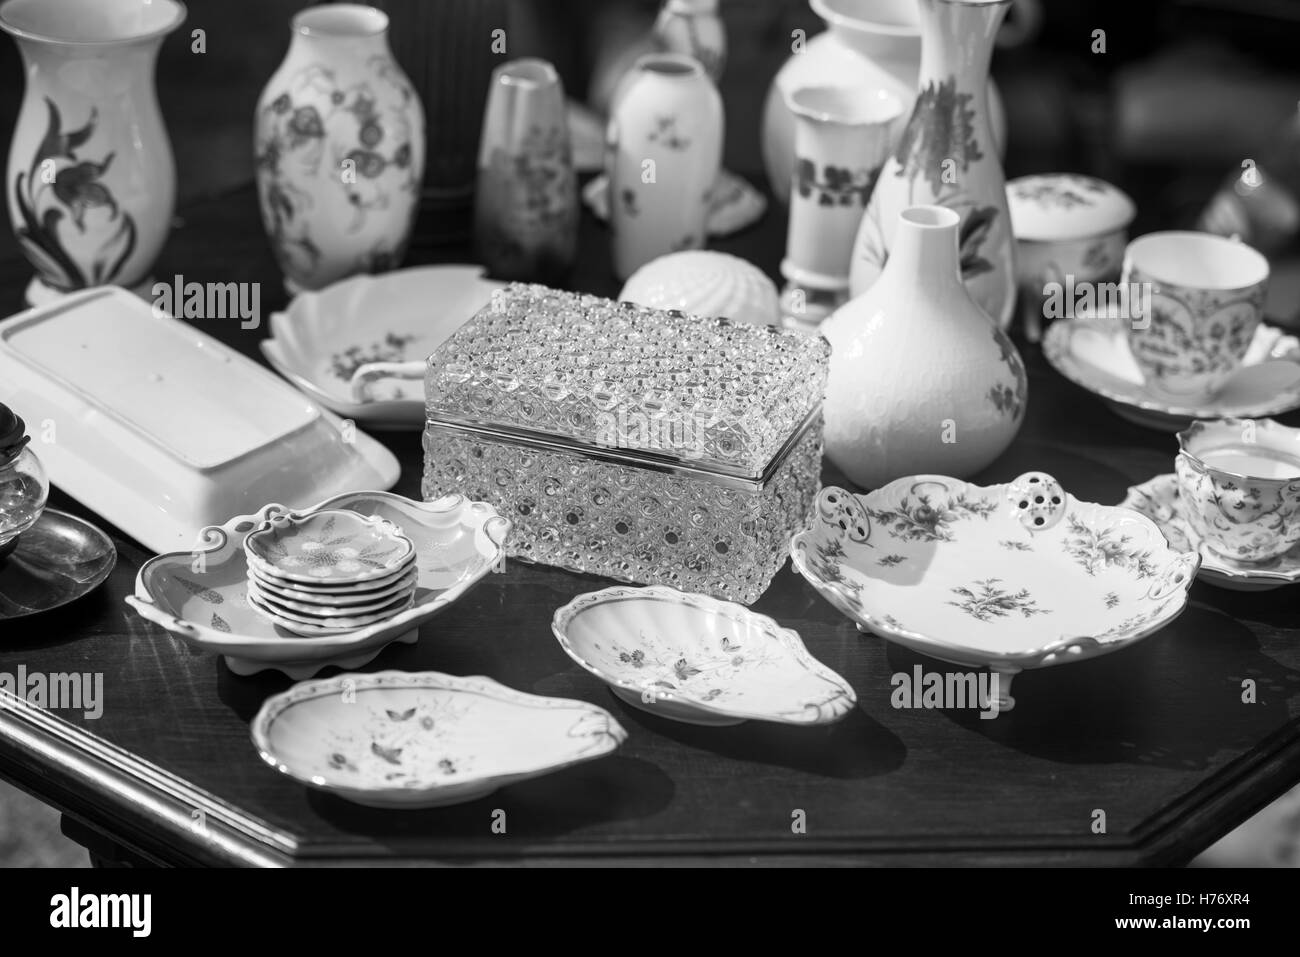 Delft blue pottery Black and White Stock Photos & Images - Alamy